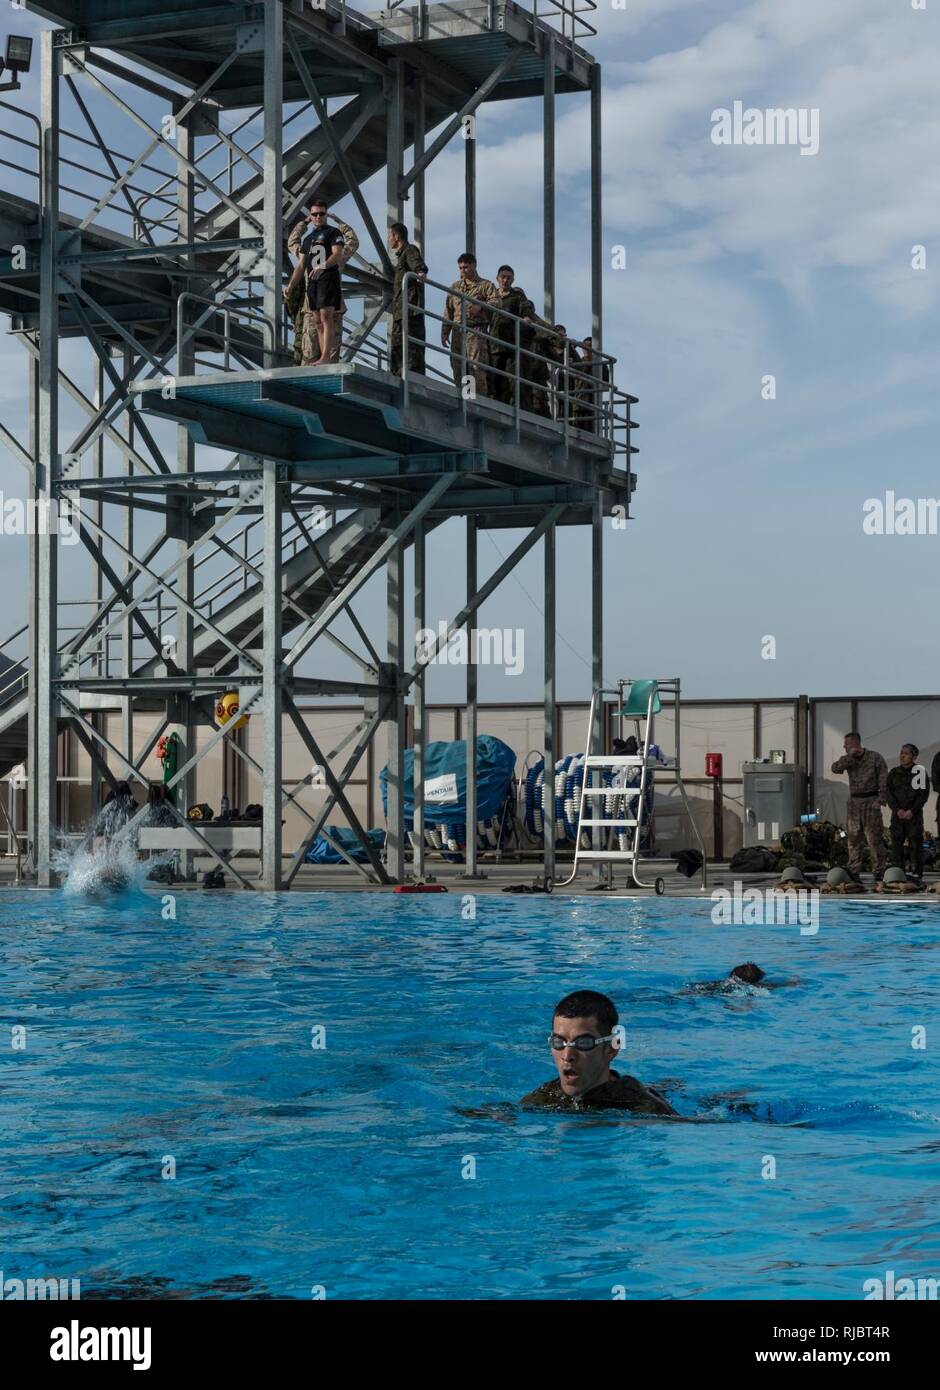 Soldiers in the Japan Ground Self Defense Force conduct Marine Corps intermediate swim qualification as a part of the Exercise Iron Fist on Camp Pendleton, CA, Jan. 16, 2018. Exercise Iron Fist brings together U.S. Marines from the 11th Marine Expeditionary Unit and Soldiers from the Japan Ground Self Defense Force, Western Army Infantry Regiment, to improve bilateral planning, communicating, and conduct combined amphibious operations. Stock Photo